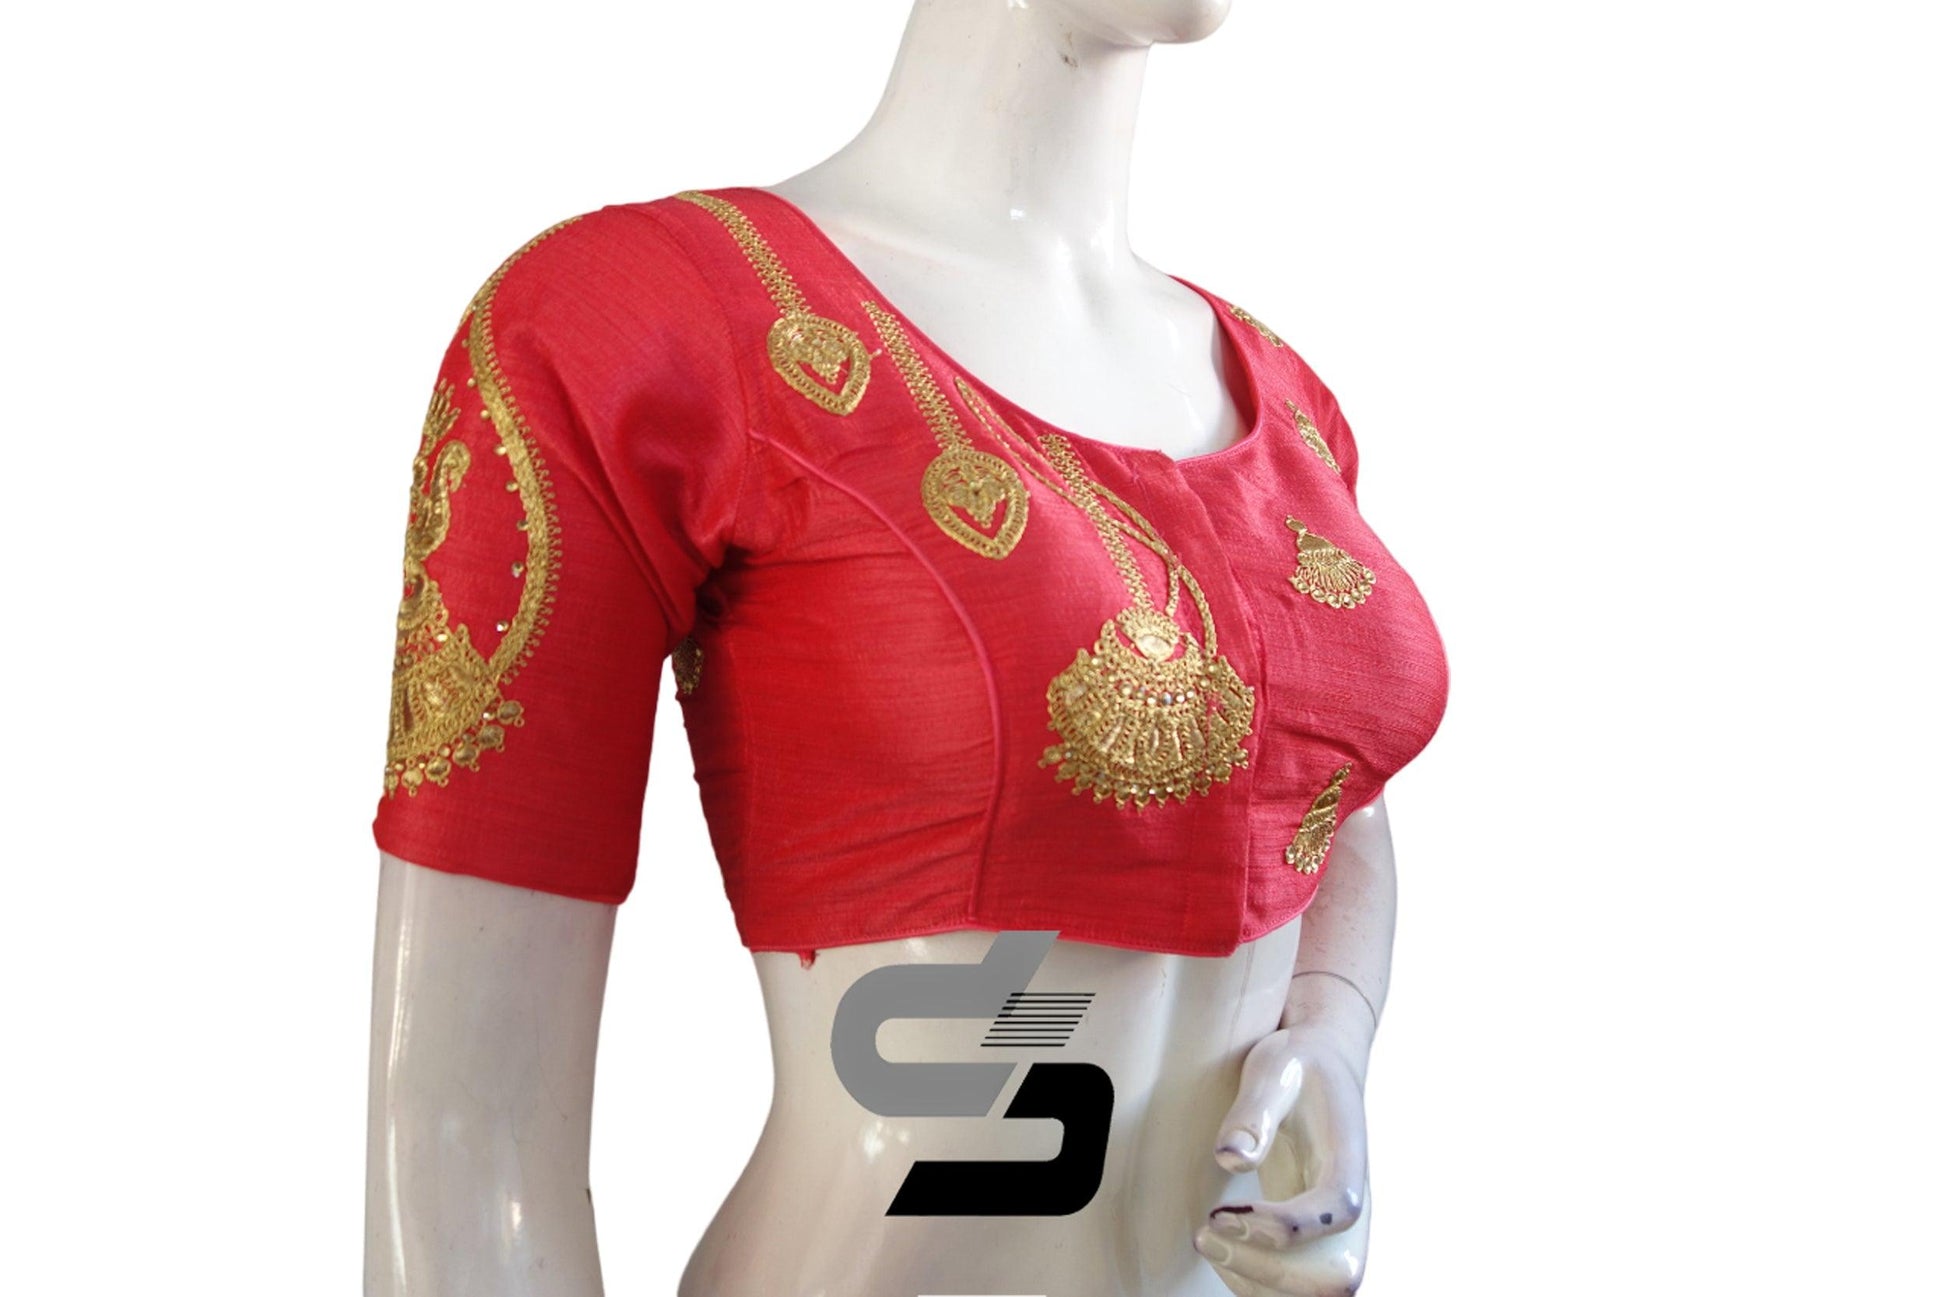 Peach Pink Color High Neck Designer Embroidery Readymade Saree Blouses,Inject a dose of lively shades. - D3blouses